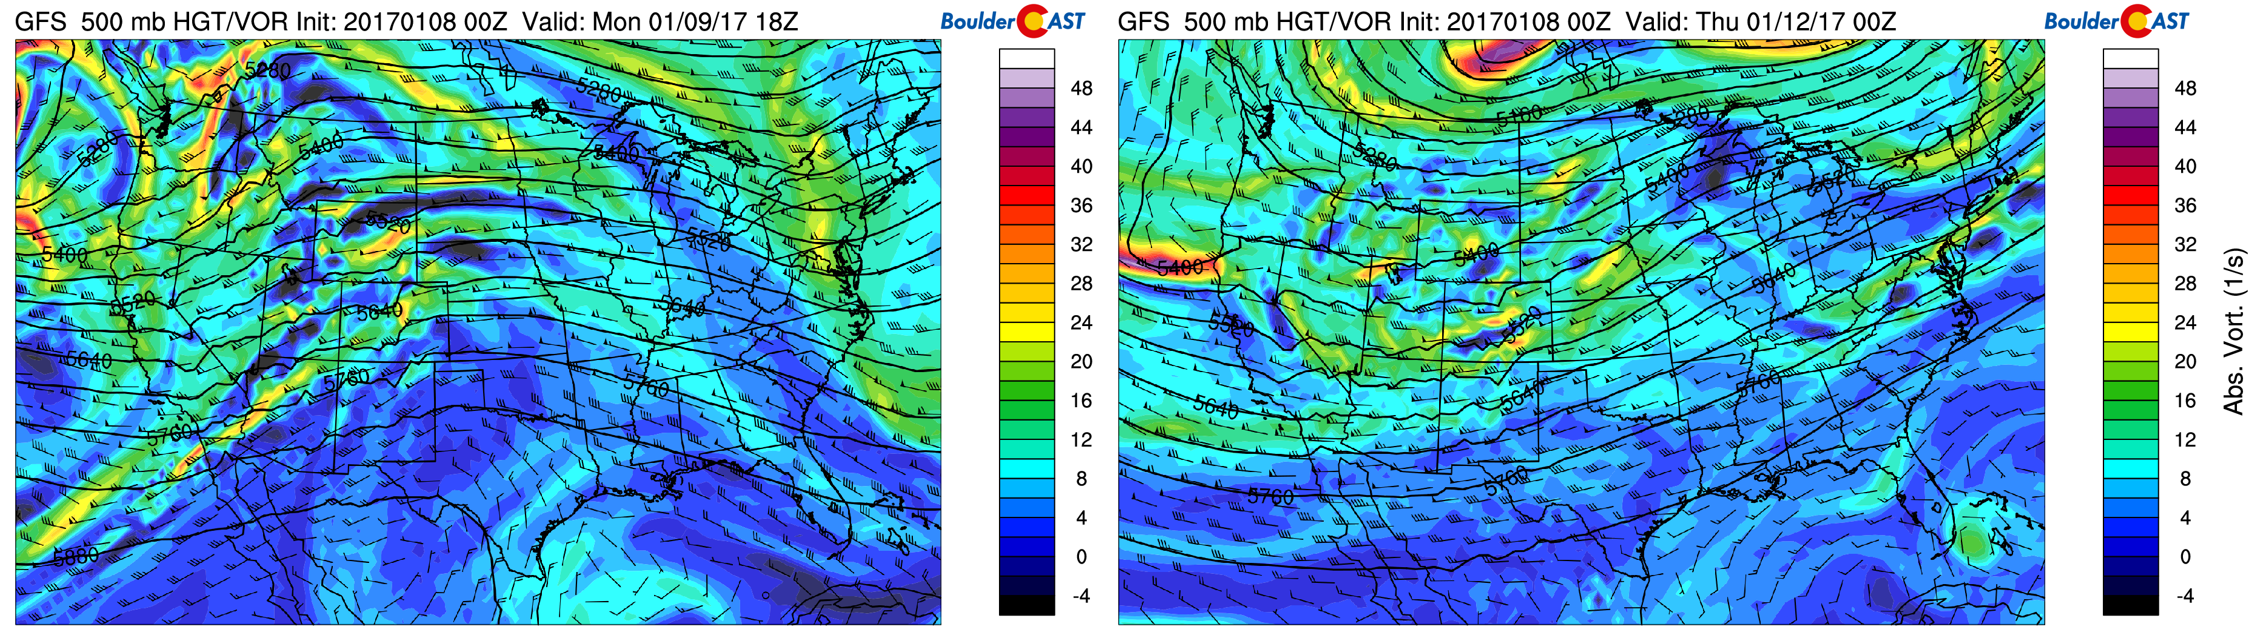 GFS 500 mb vorticity maps for Monday (left) and Wednesday (right).